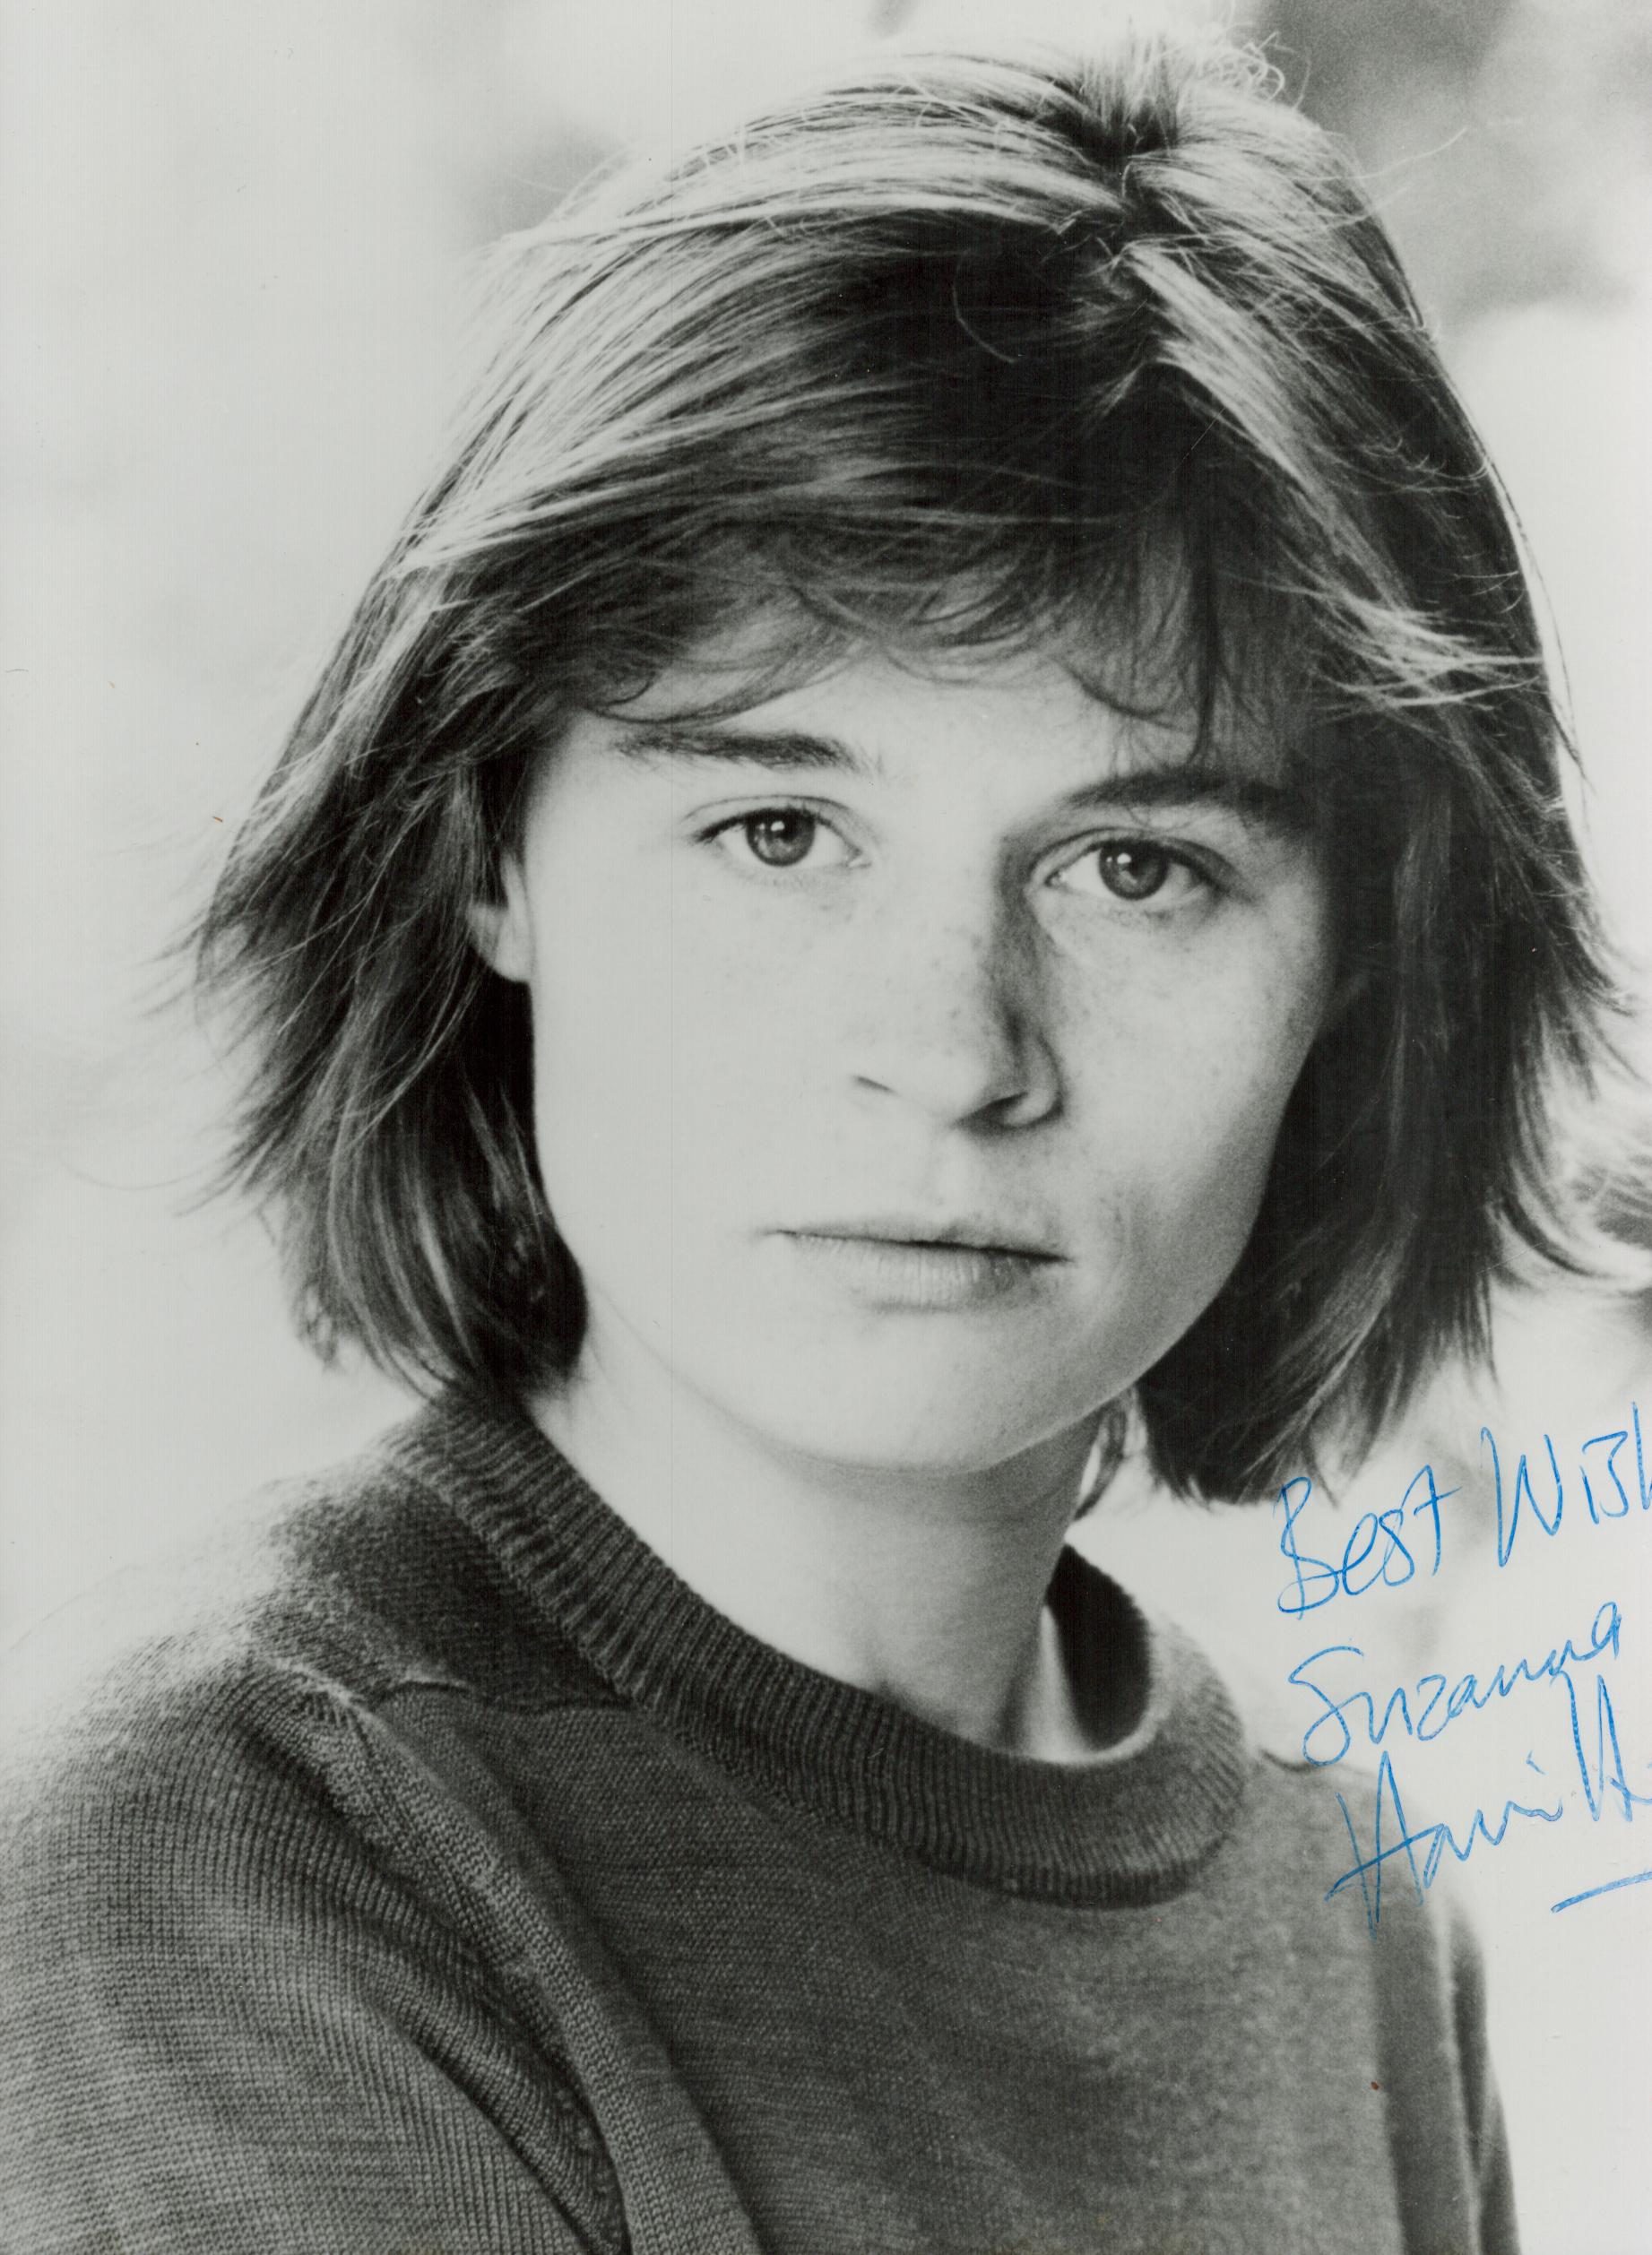 Suzanna Hamilton signed black & white photo 8.5x6.5 Inch. Is an English actress, notable for playing